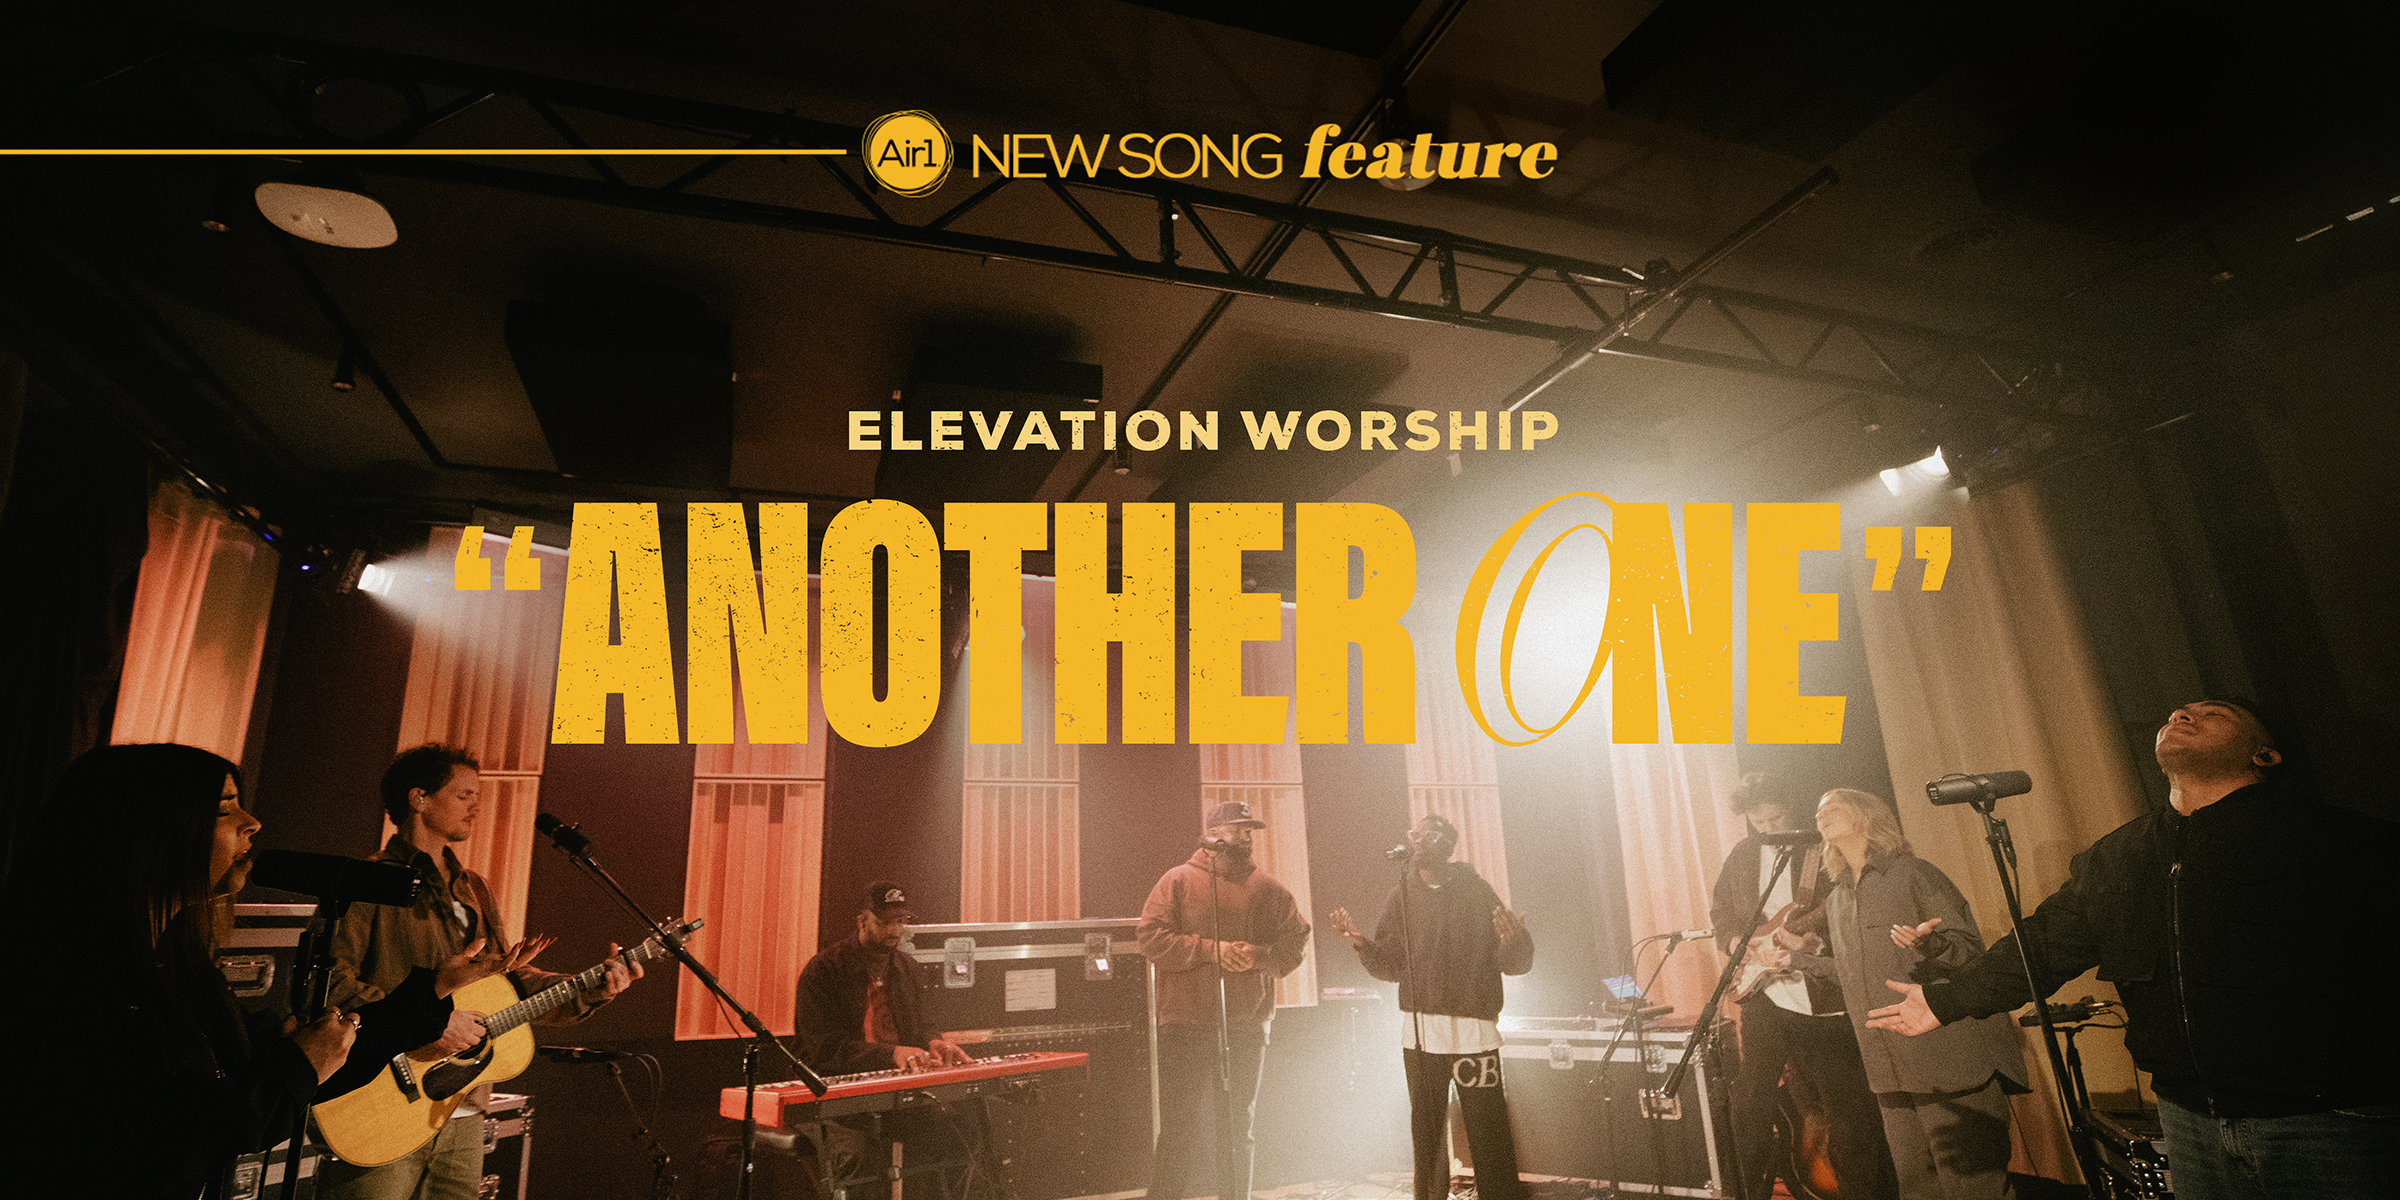 New Song Feature: "Another One" Elevation Worship